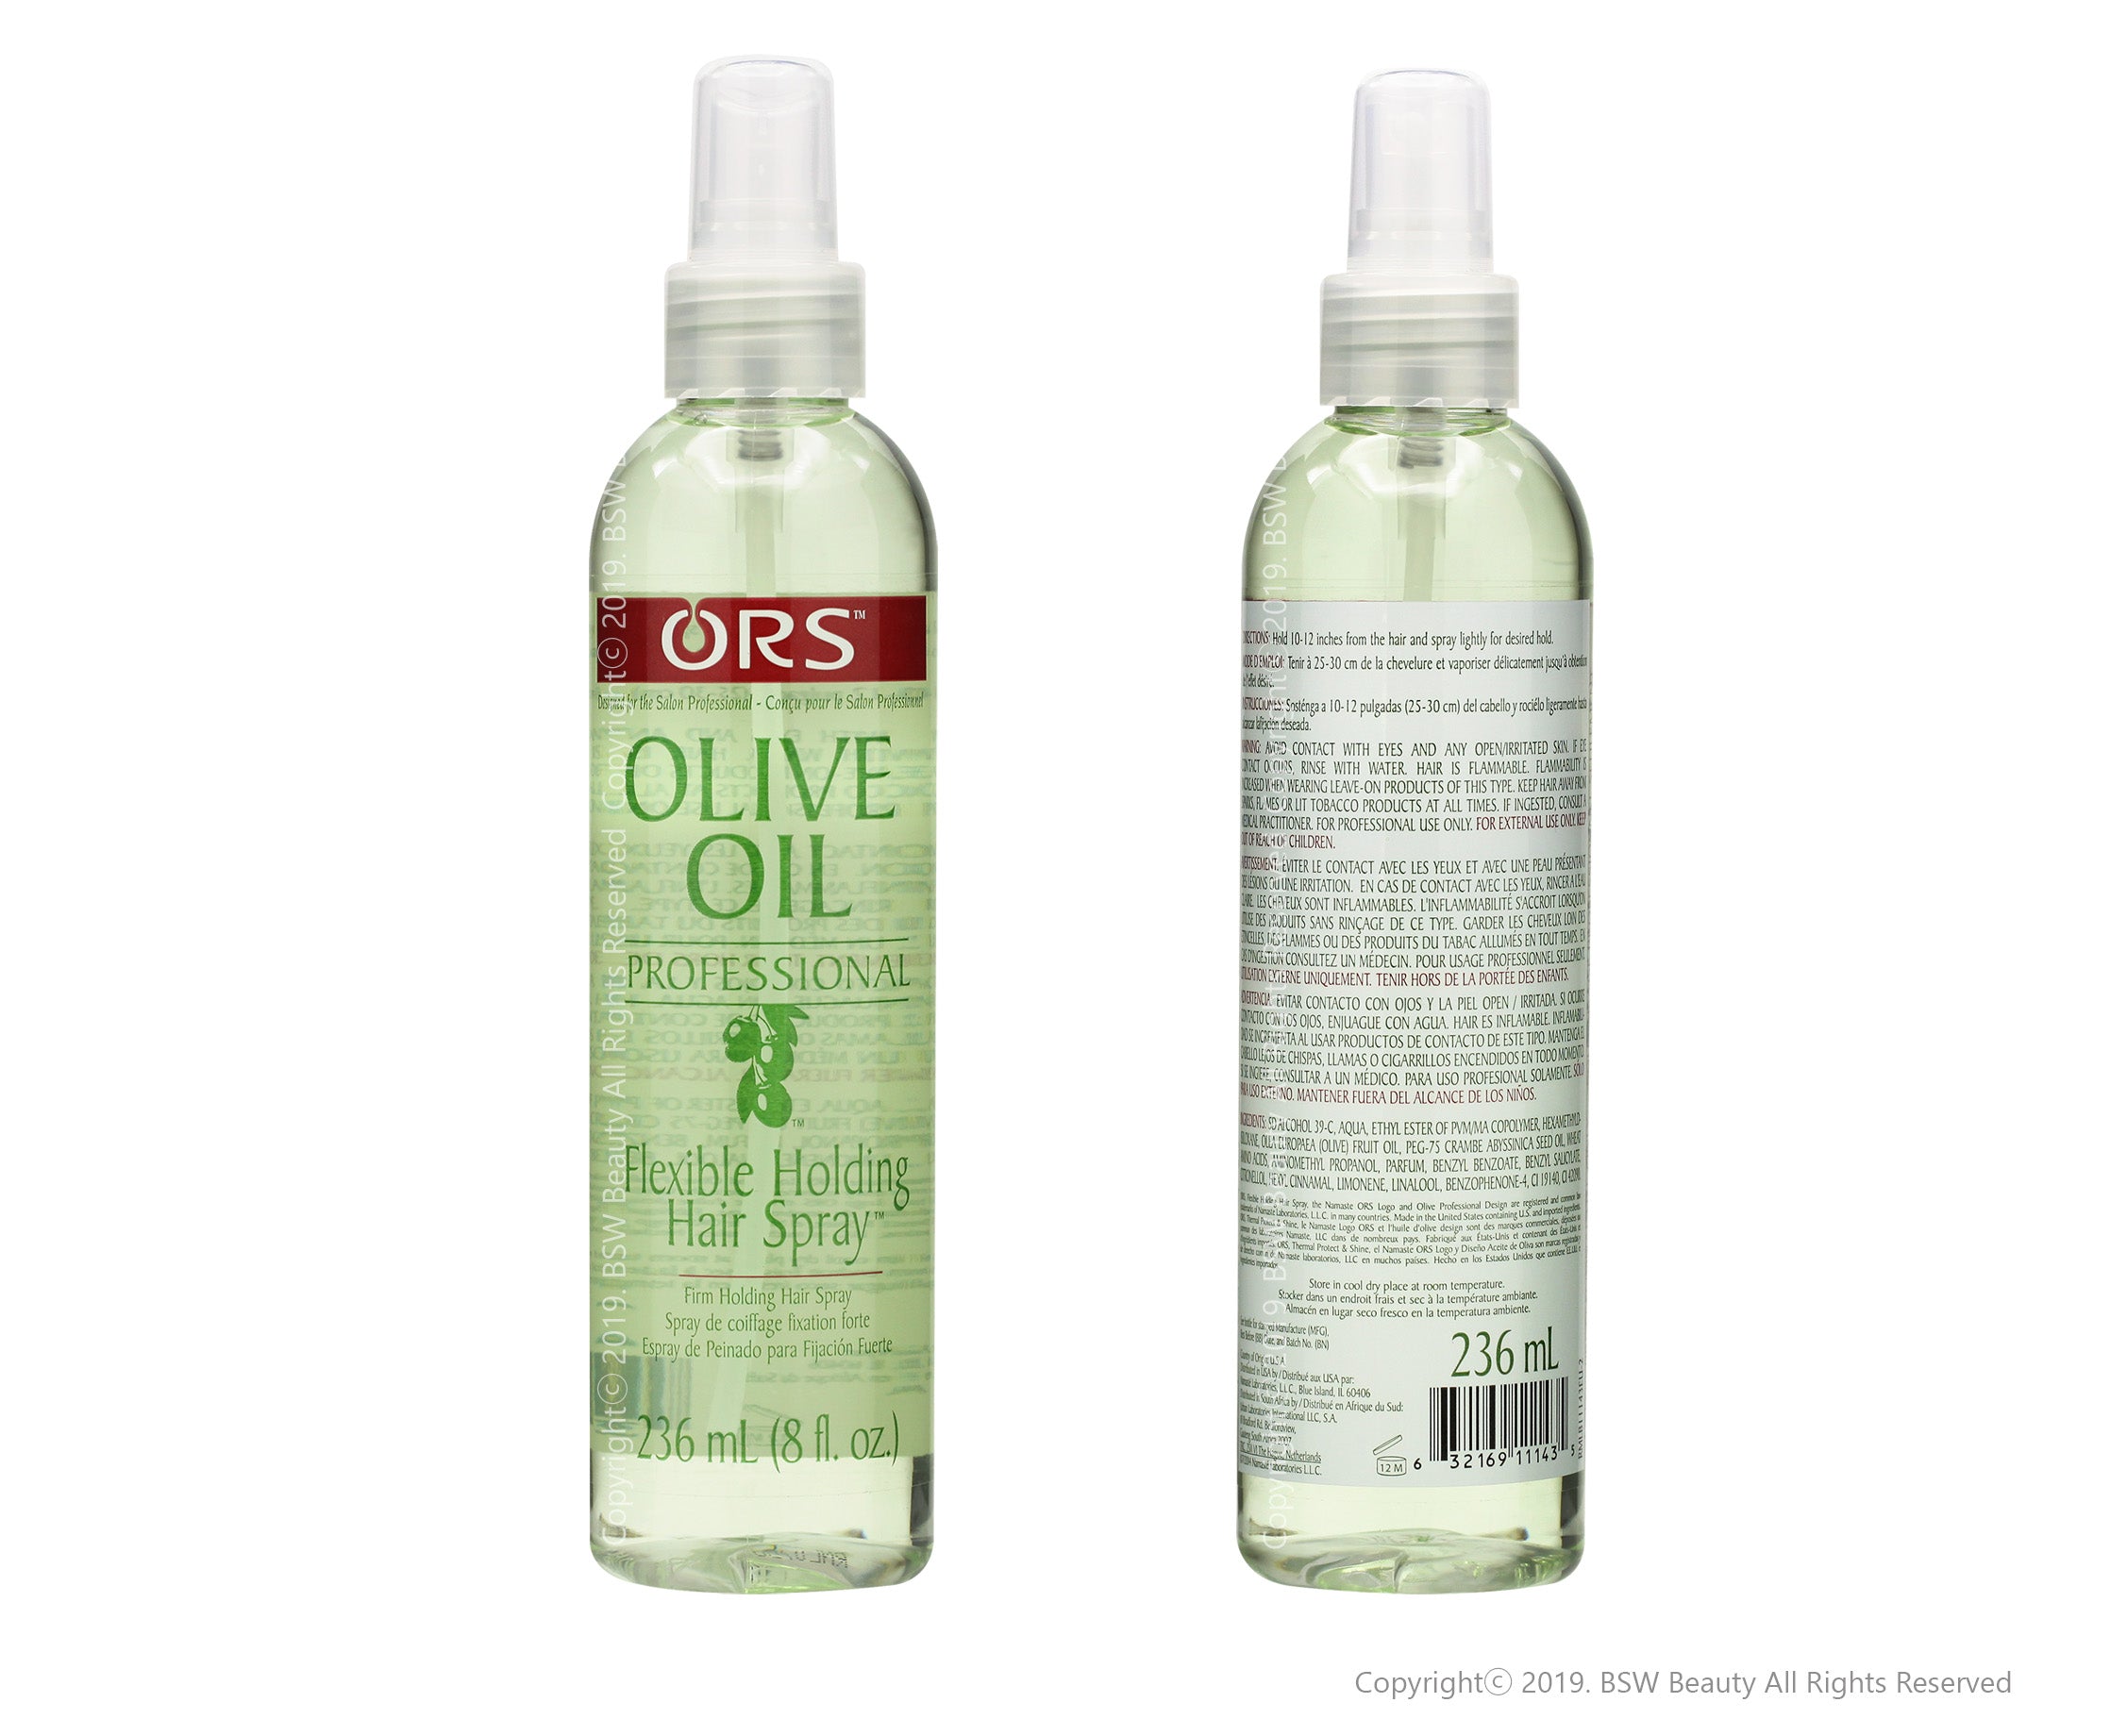 ORS Olive Oil Frizz Control and Shine Glossing Hair Polisher 6 Ounce